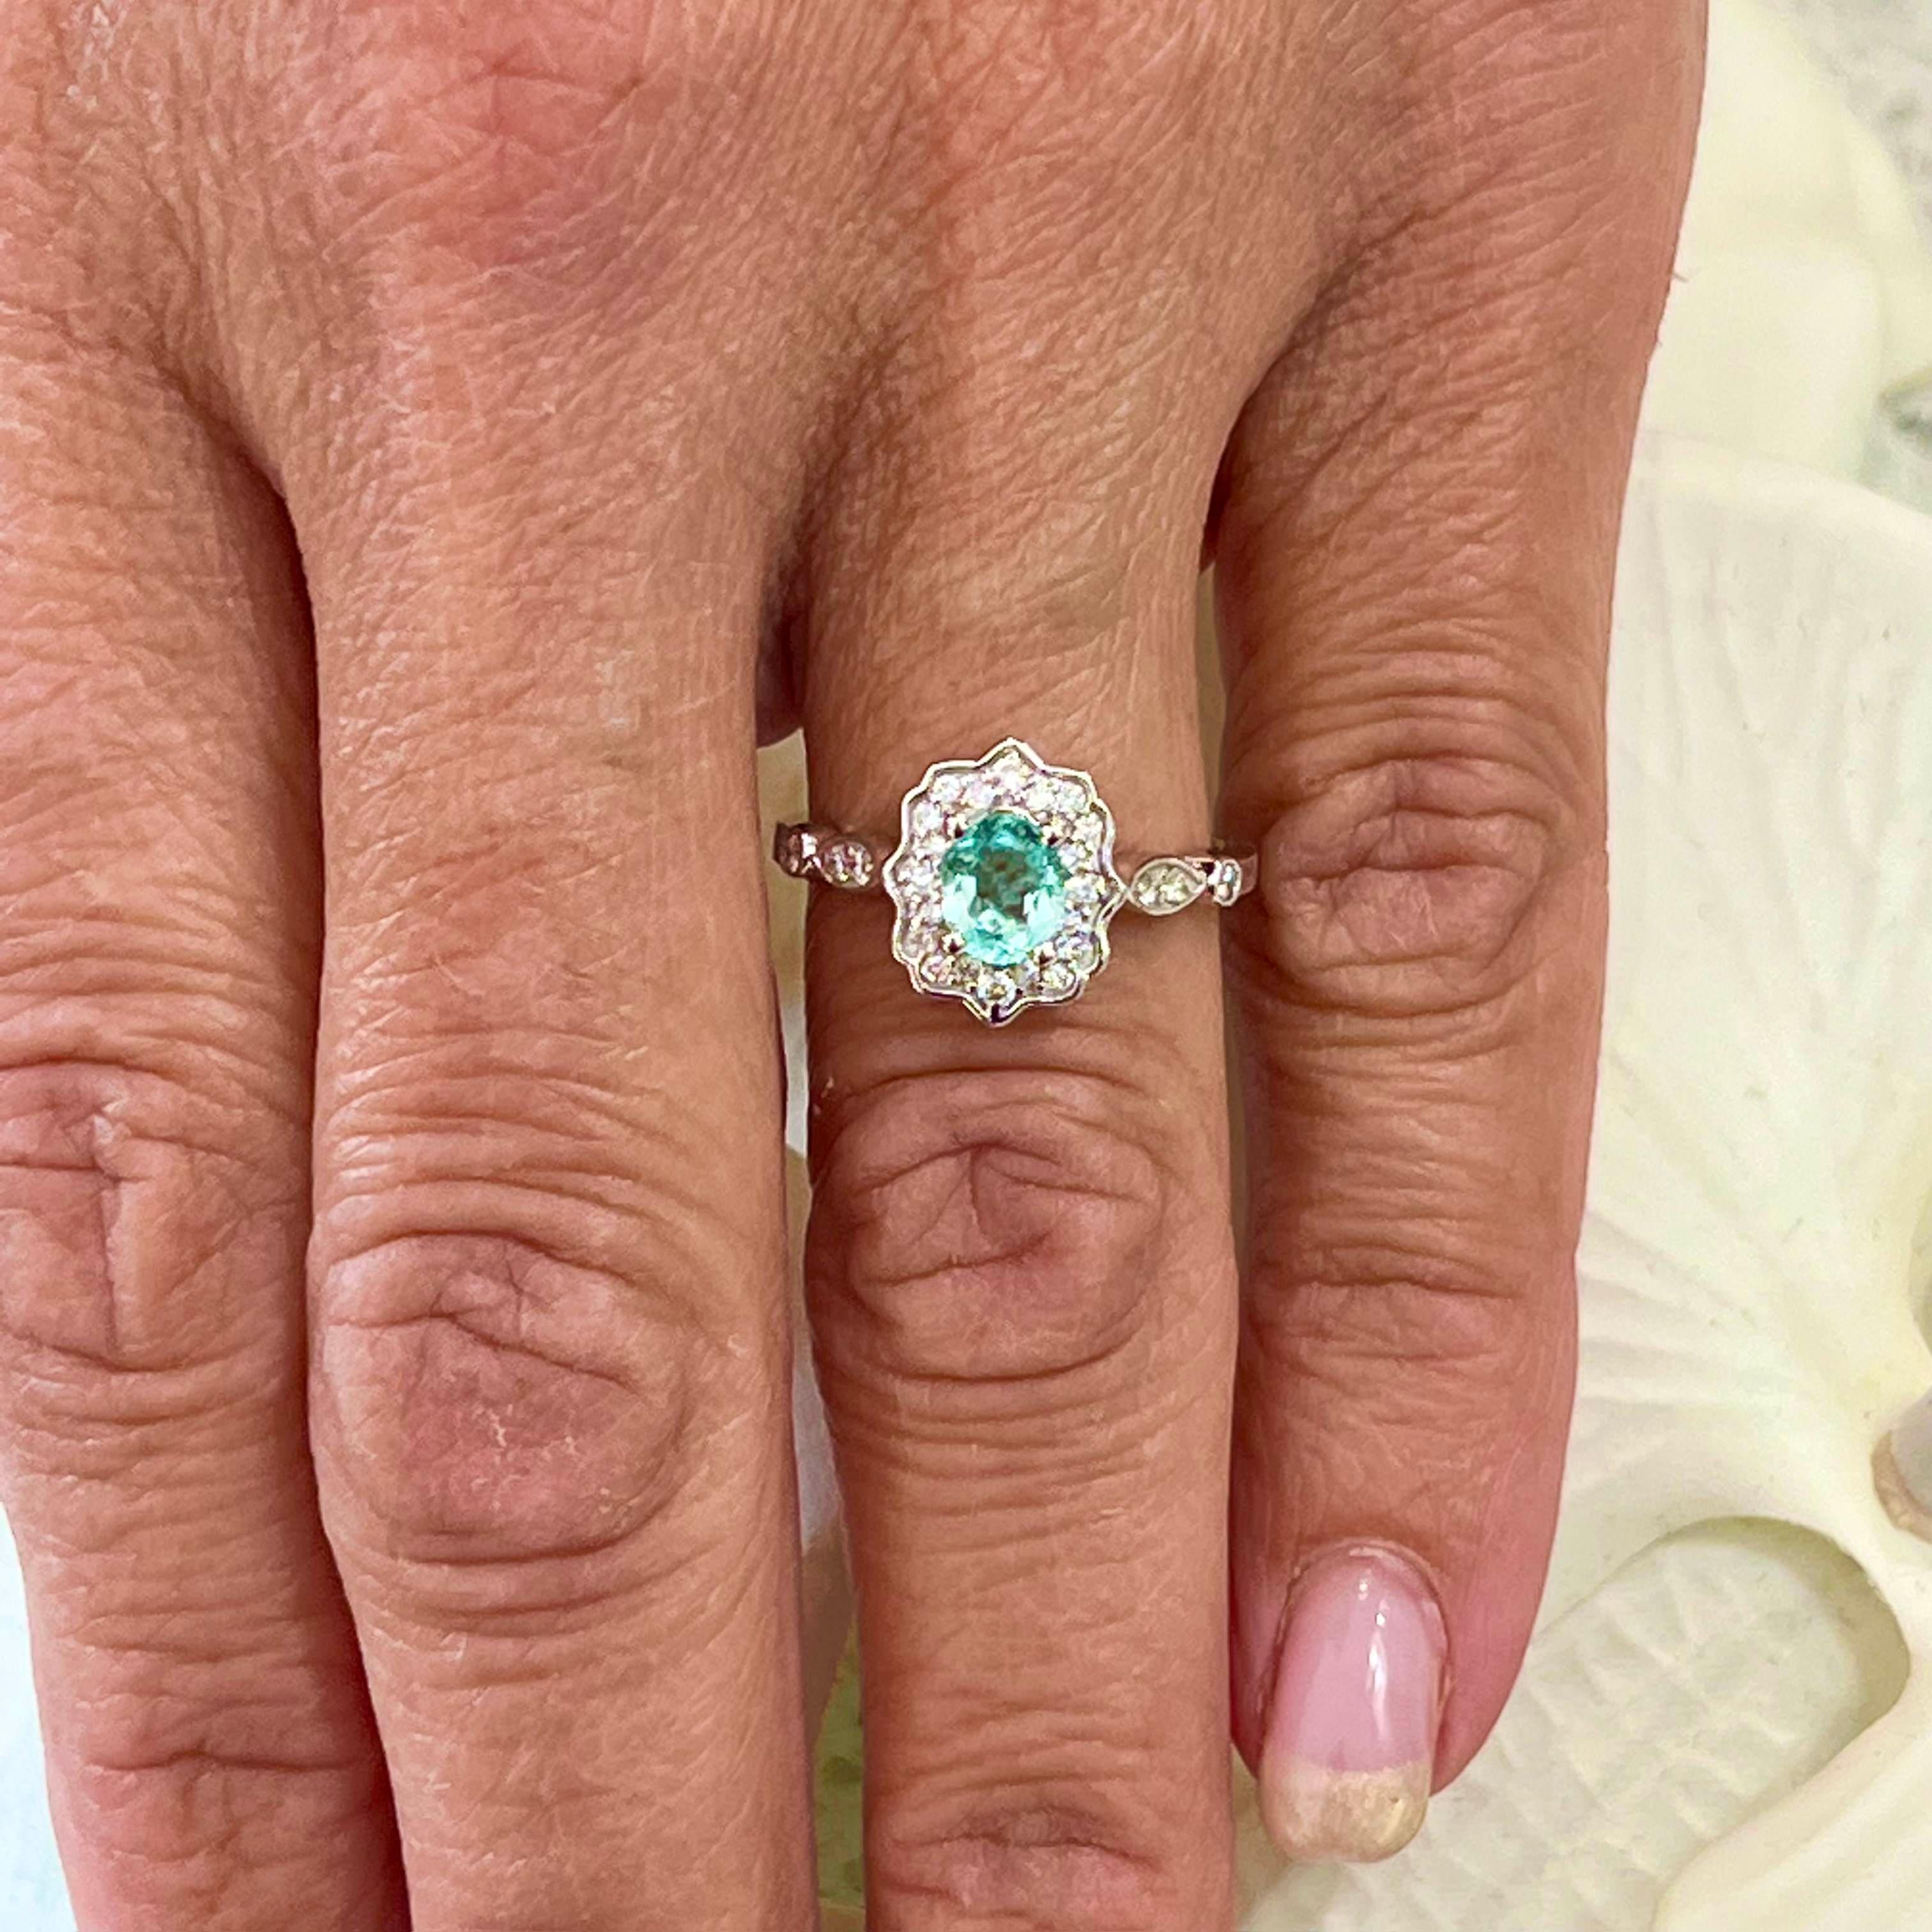 Natural Colombian Emerald Diamond Ring Size 6.5 14k W Gold 0.80 TCW Certified $4,750 216667

Nothing says, “I Love you” more than Diamonds and Pearls!

This Emerald ring has been Certified, Inspected, and Appraised by Gemological Appraisal